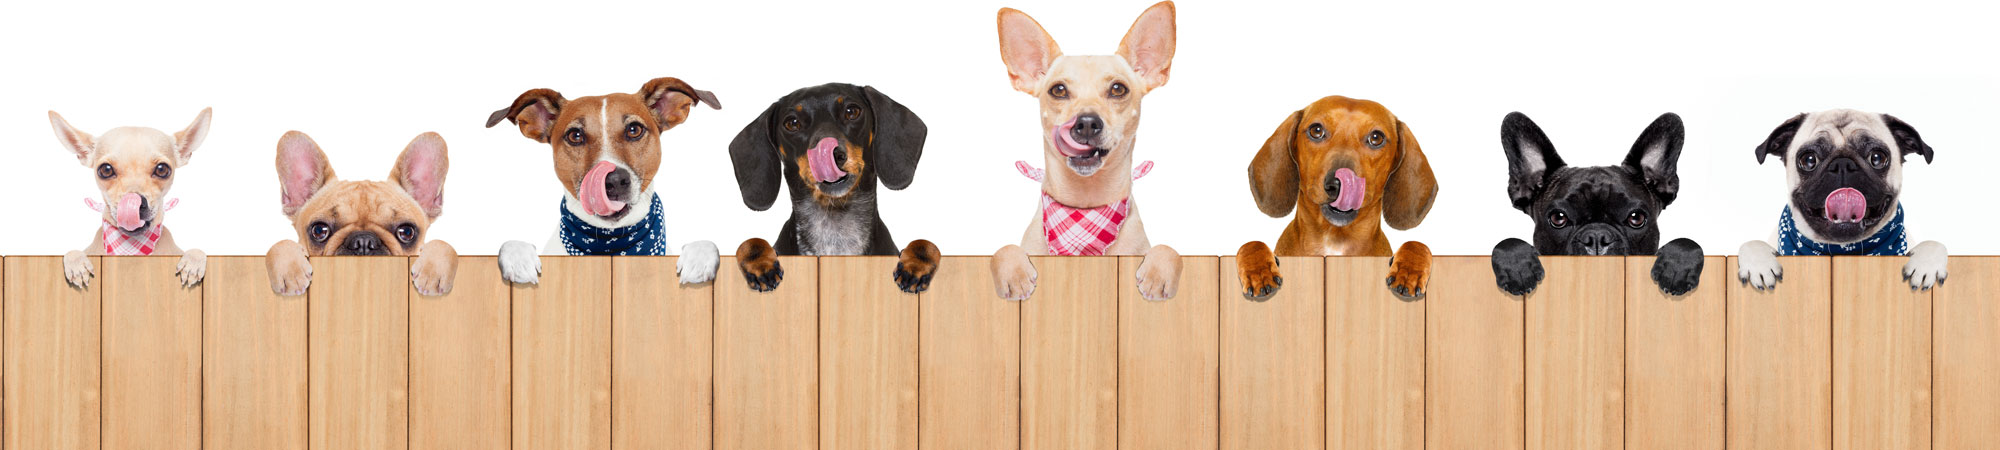 Different breeds of hungry dogs peering over the fence licking their lips